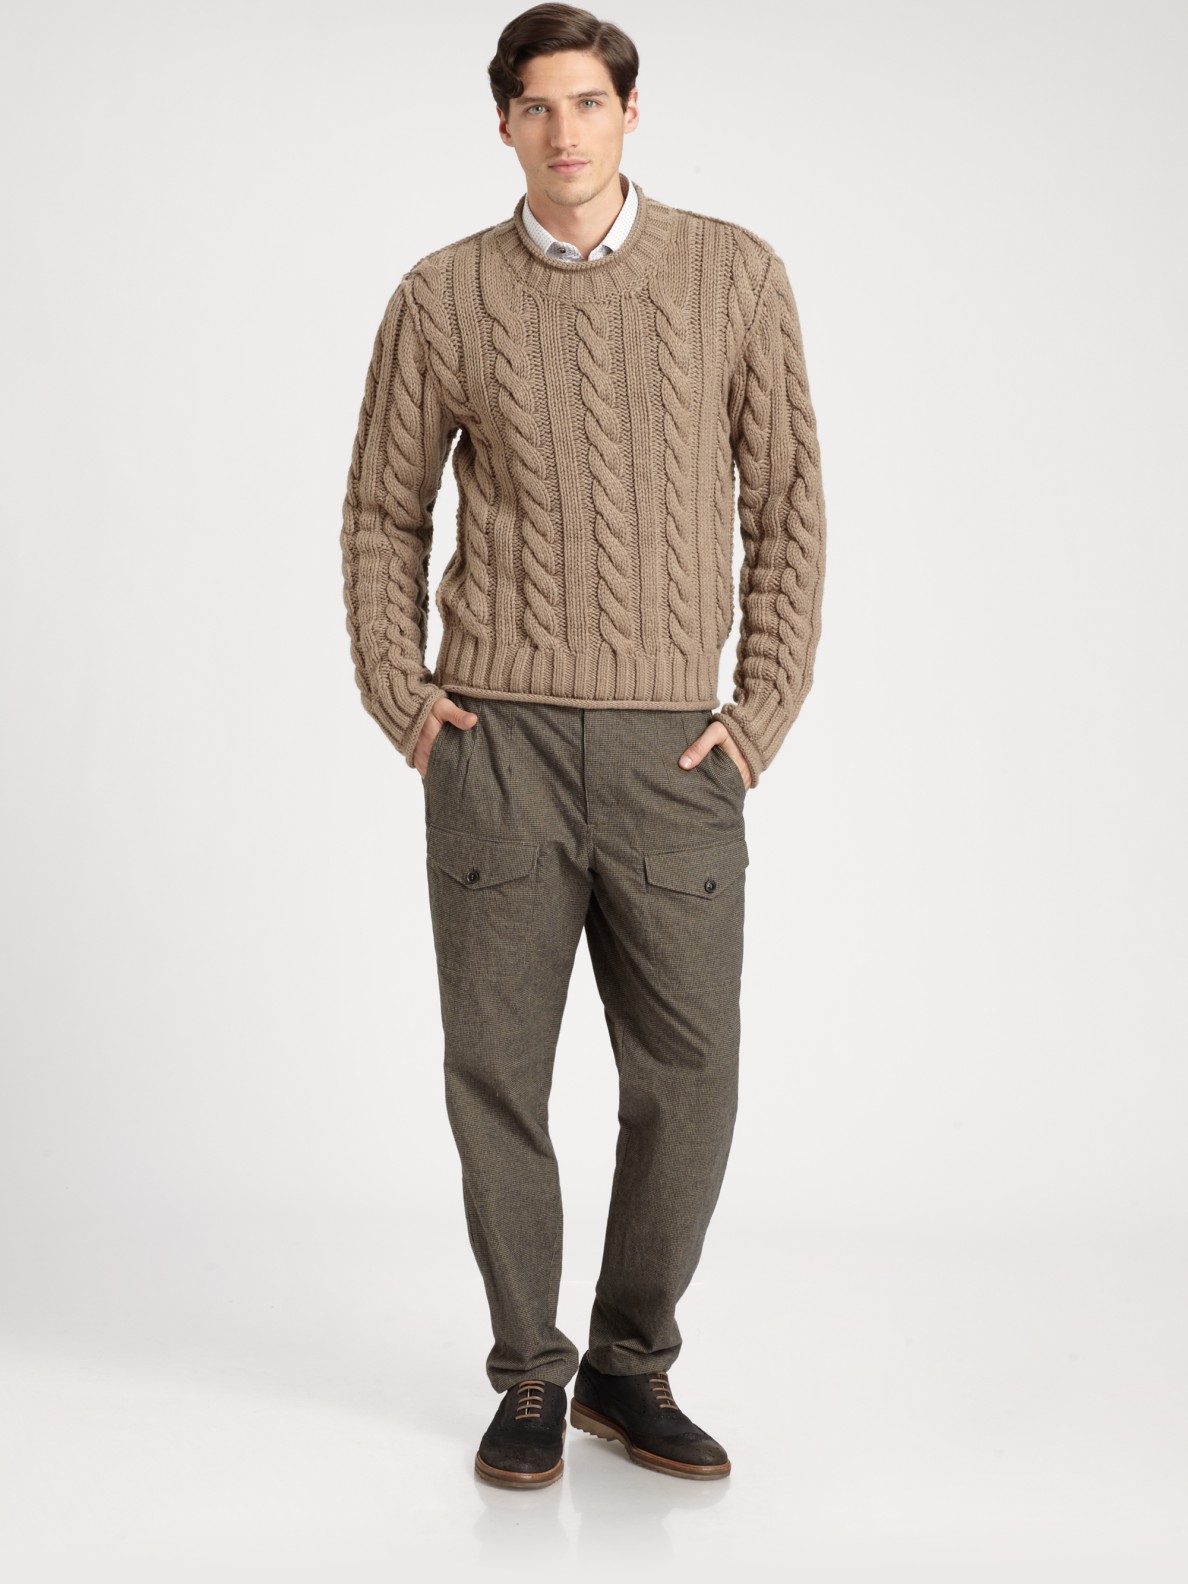 Lyst - Dolce & Gabbana Chunky Cable Knit Sweater in Natural for Men